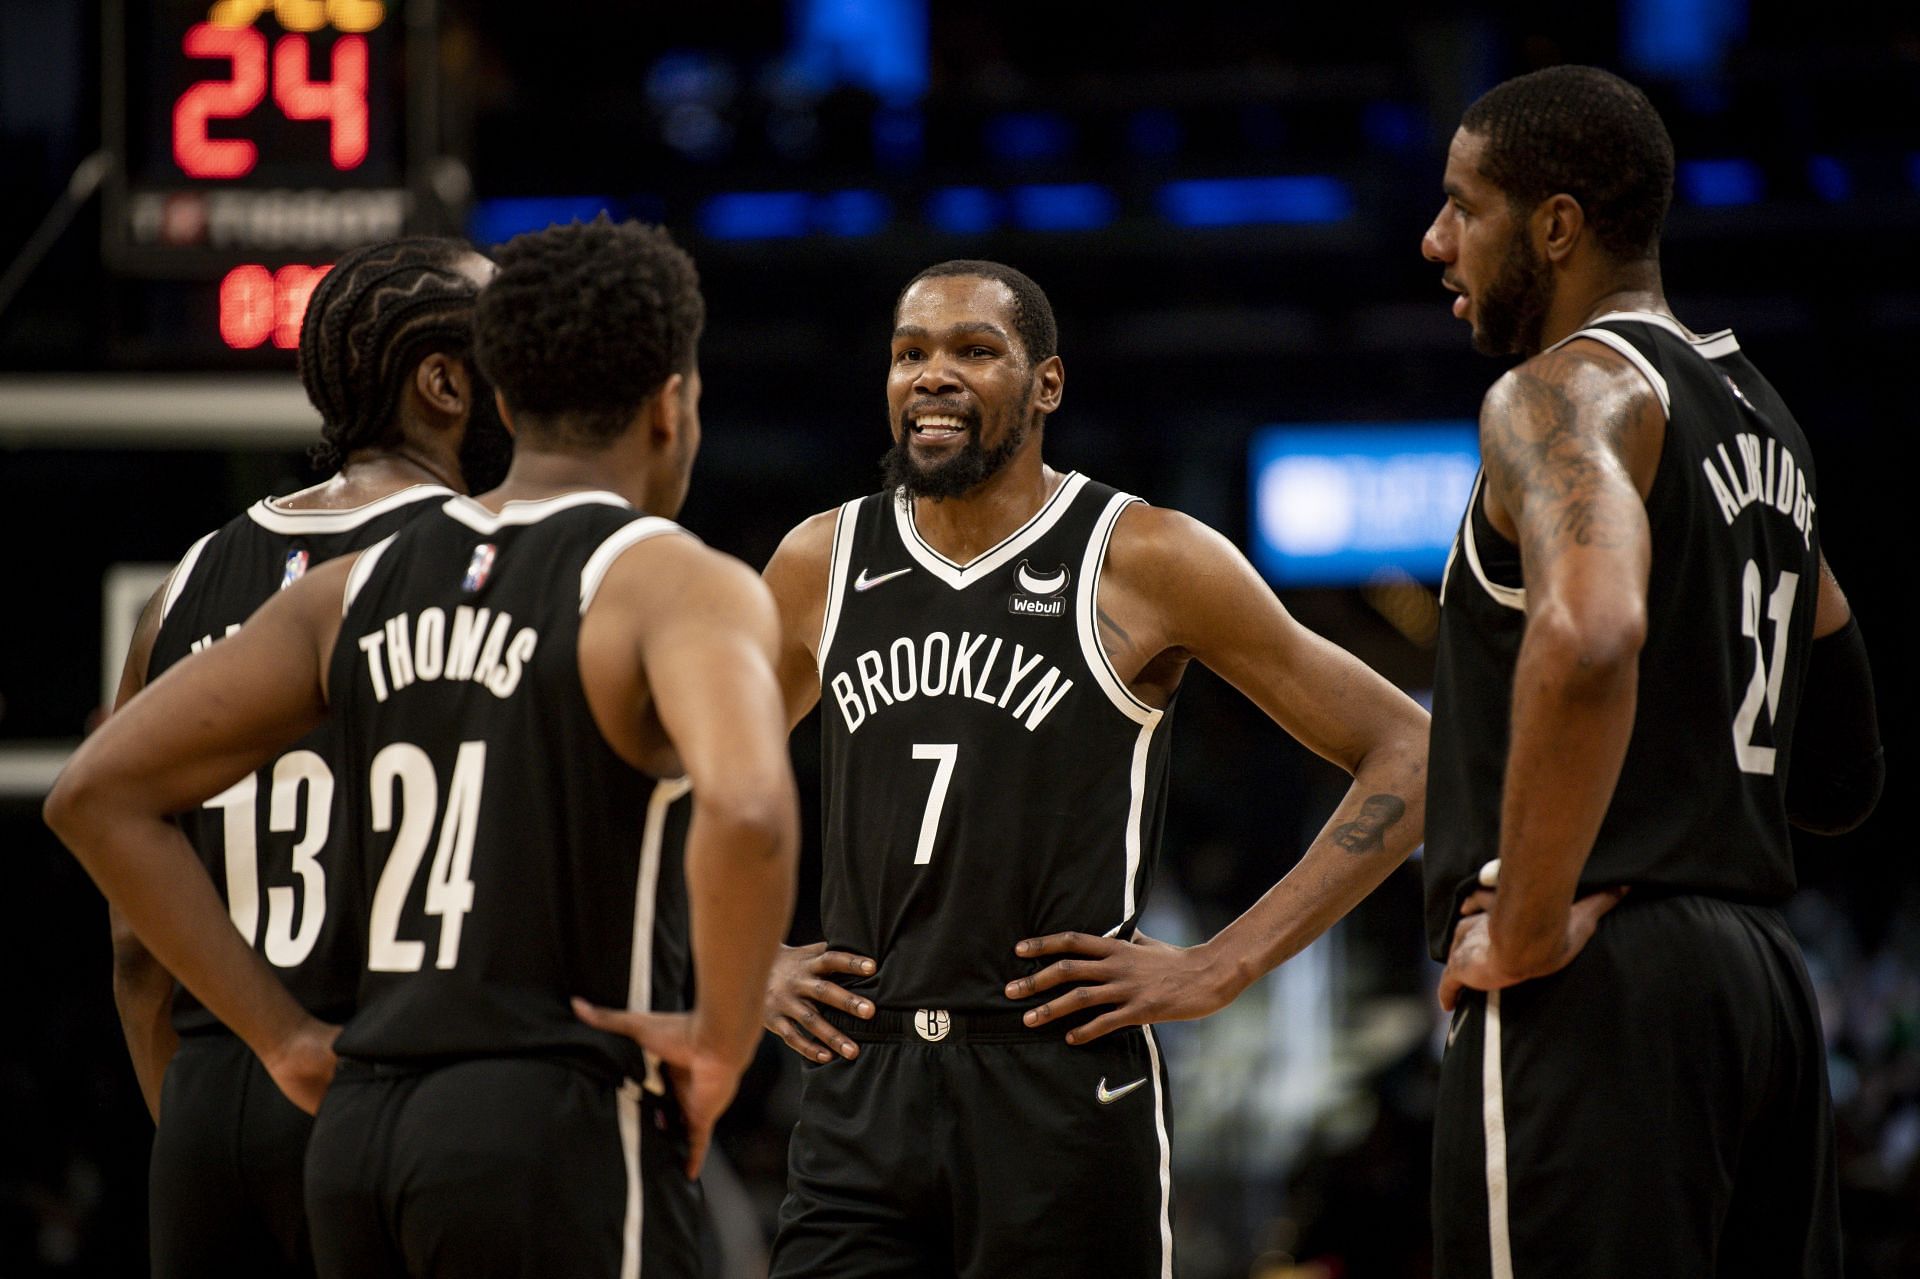 Brooklyn Nets during their game against the Boston Celtics